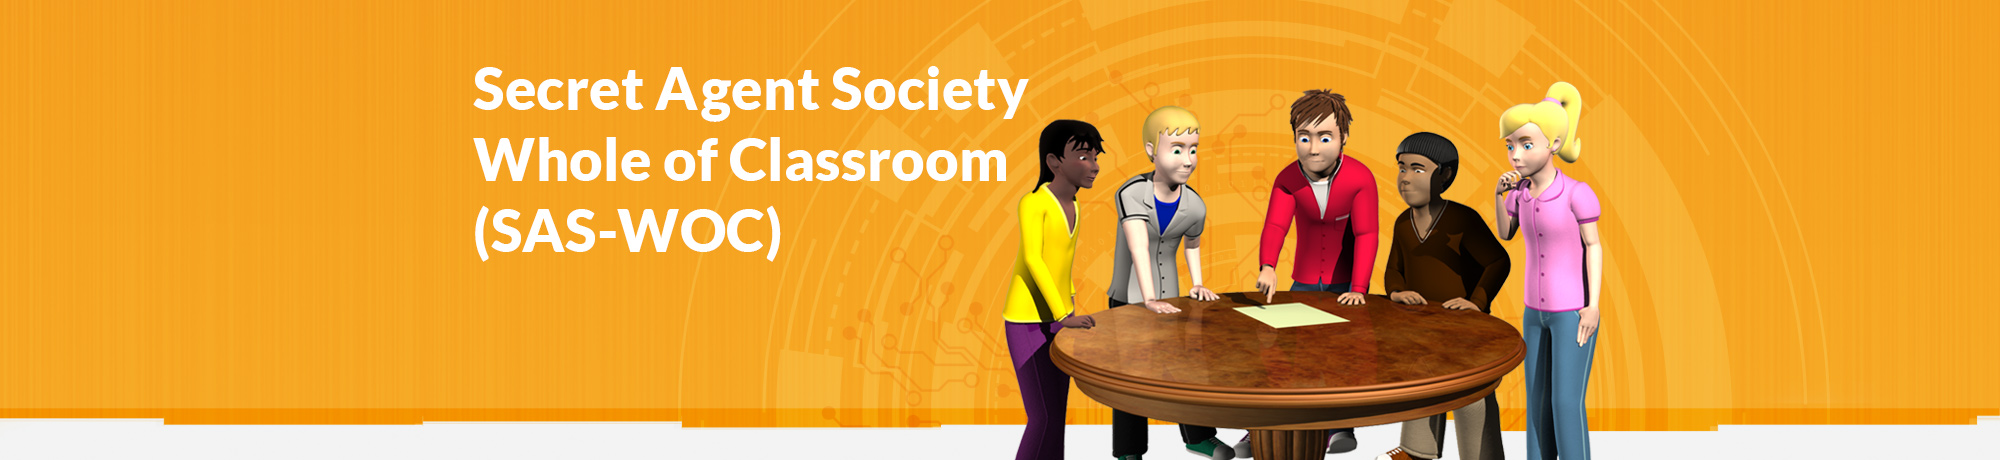 Secret Agent Society Whole of Classroom school-based research trial